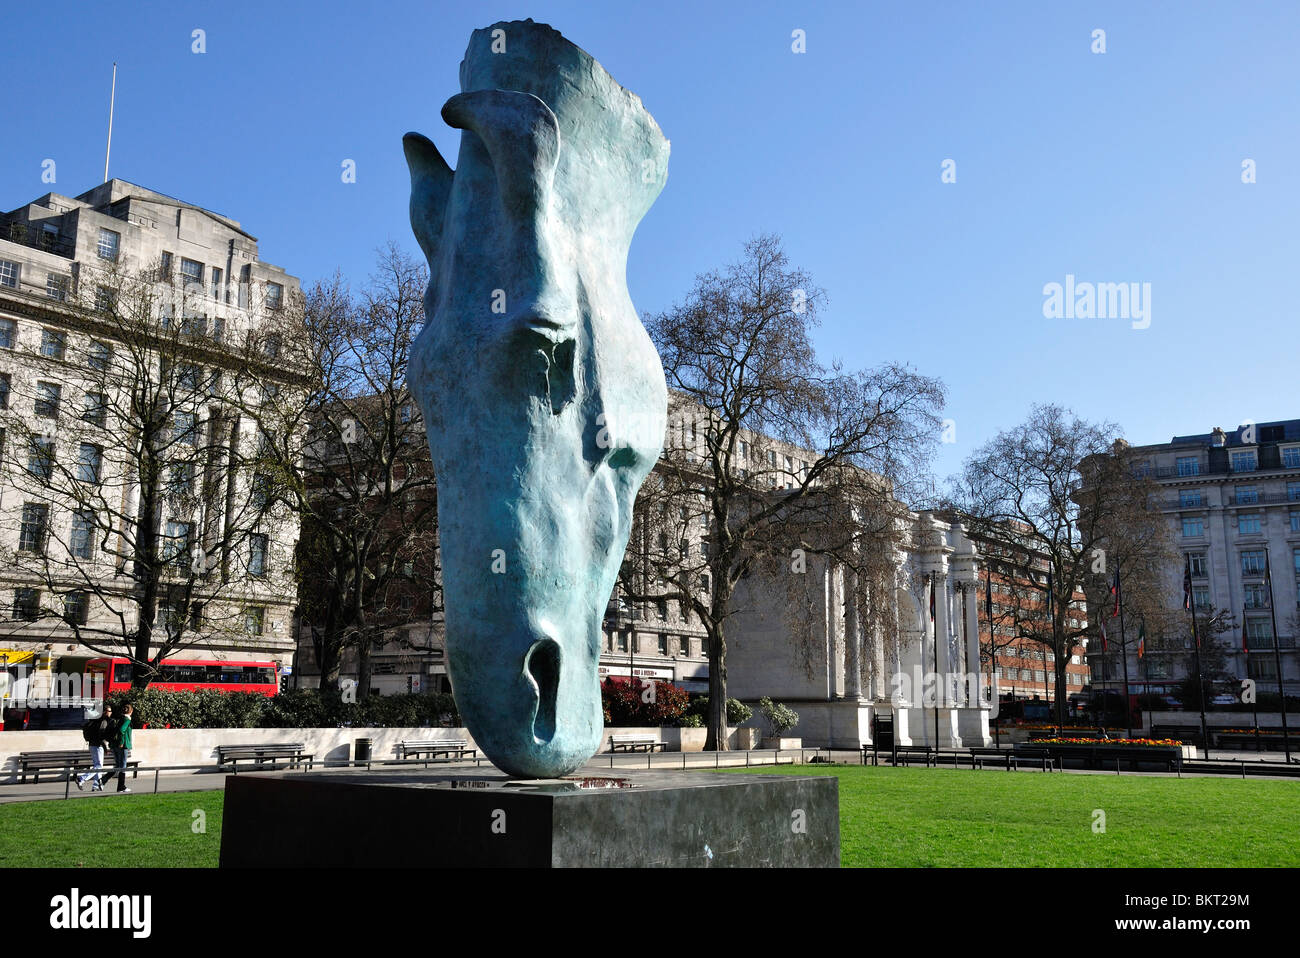 Giant horse statue at Marble Arch, London, England Stock Photo - Alamy